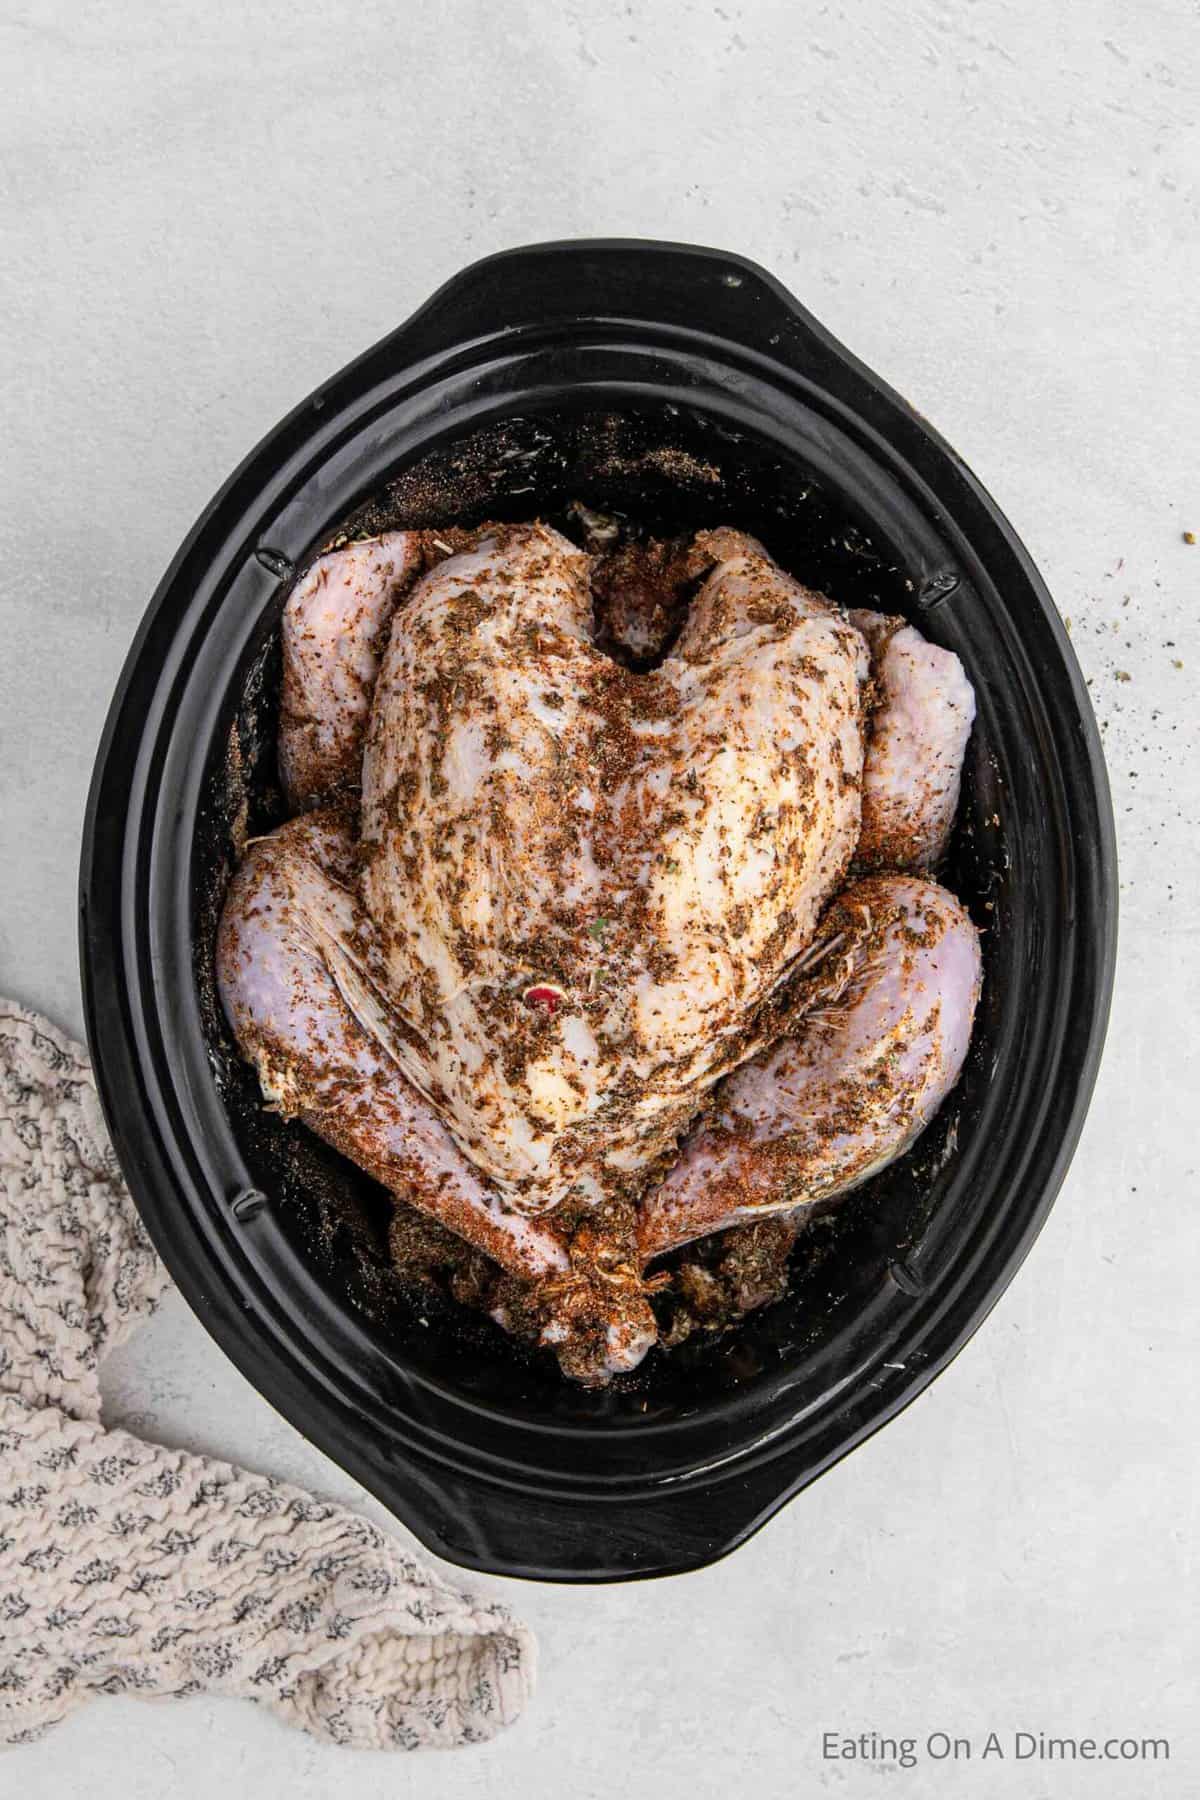 Placing the whole turkey in the slow cooker